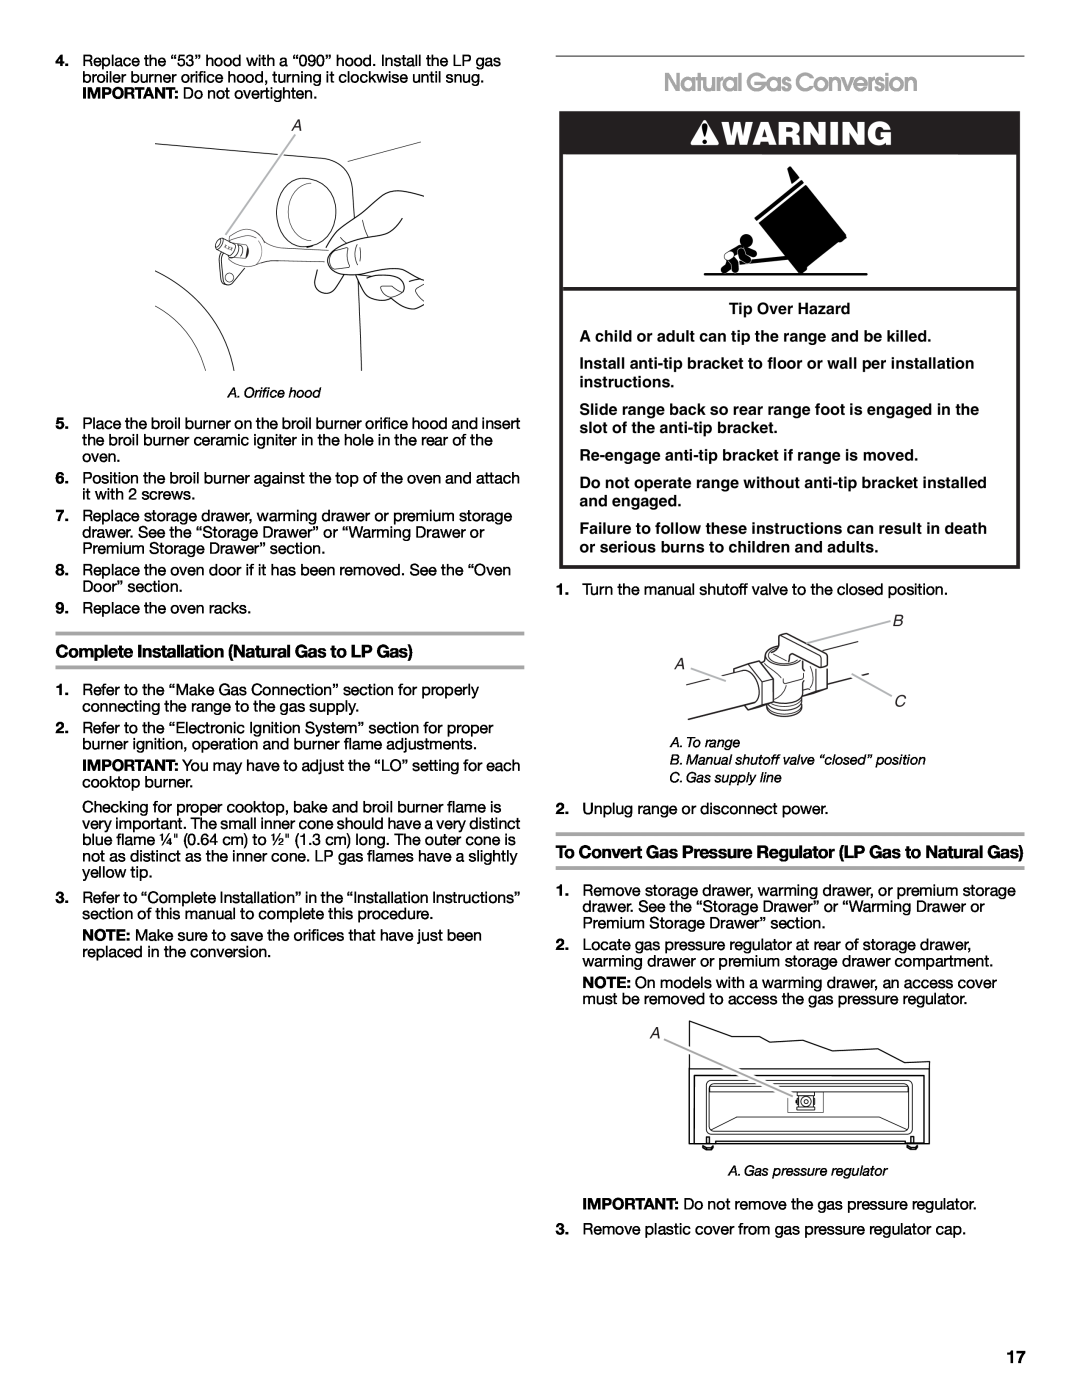 Whirlpool W10526974A installation instructions Natural Gas Conversion, Complete Installation Natural Gas to LP Gas, B A C 